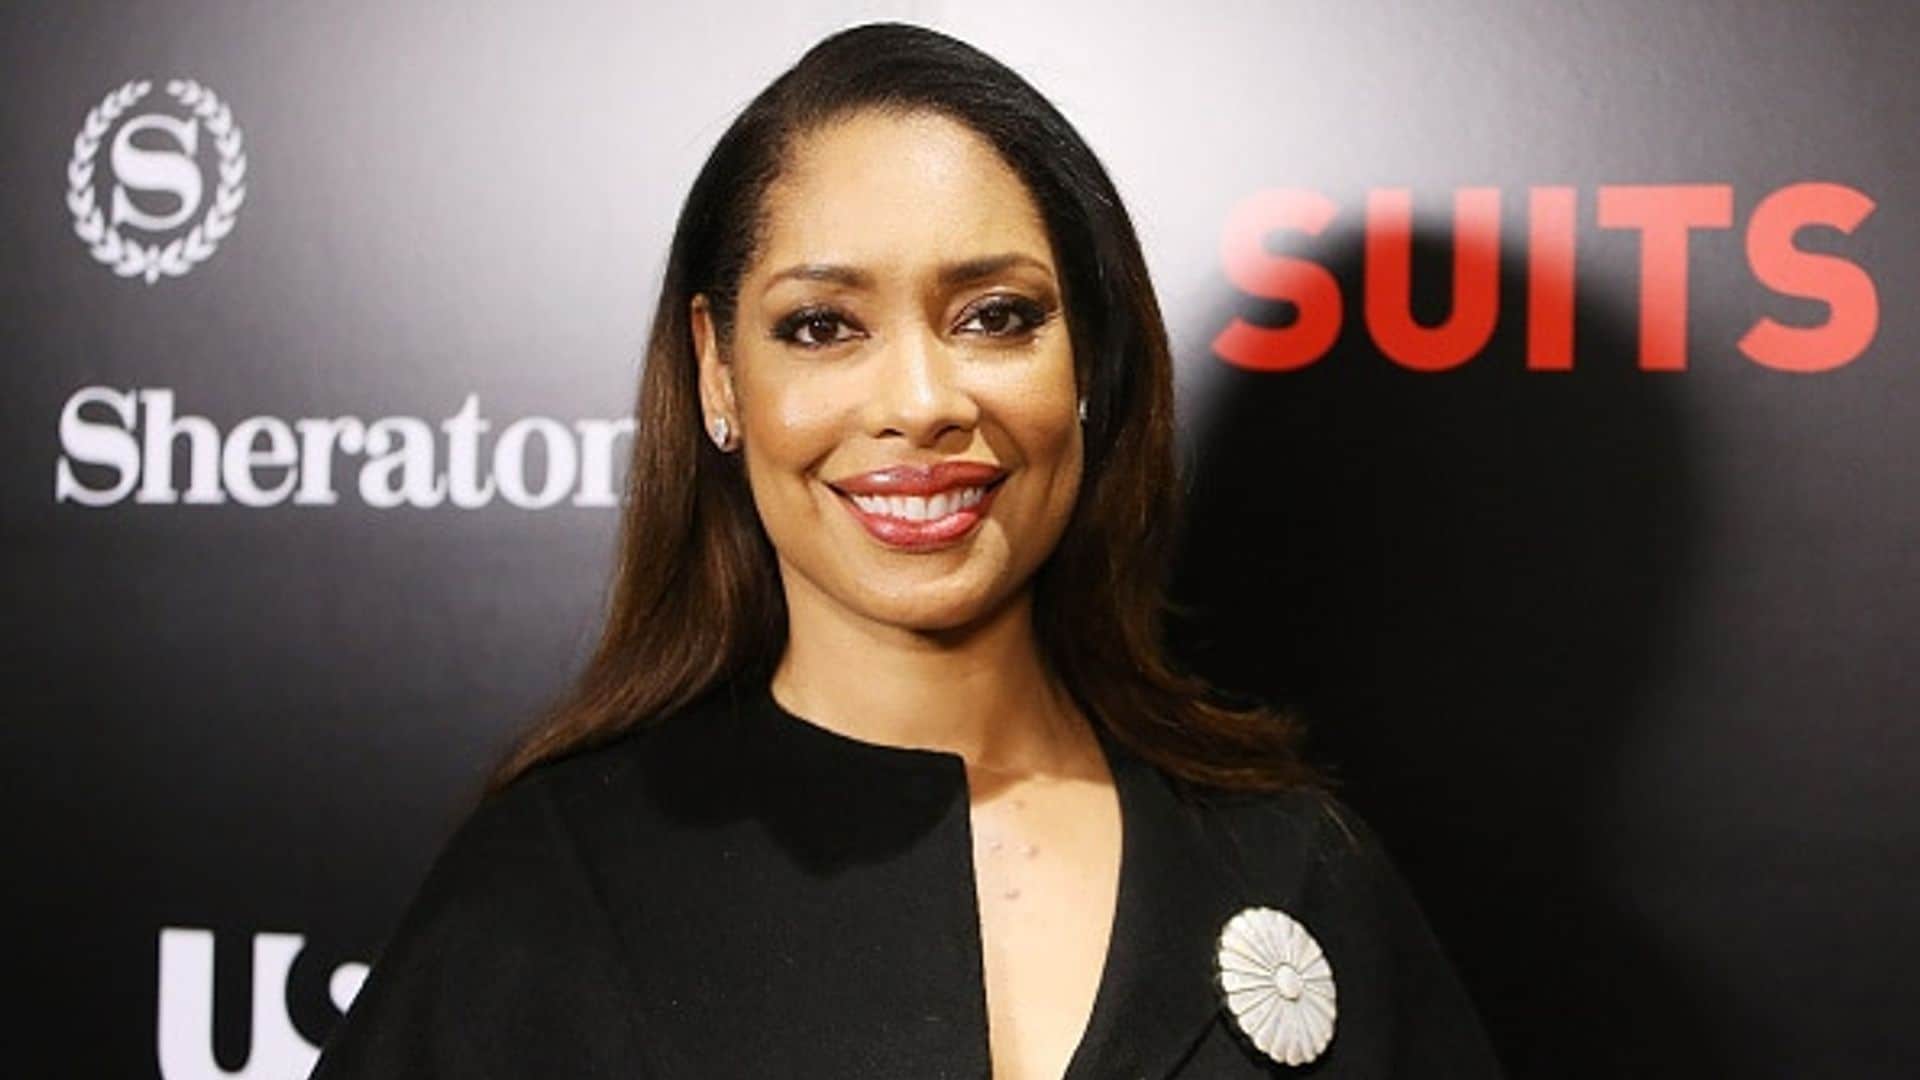 'Suits' star Gina Torres on playing top boss Jessica Pearson and her hopes for daughter Delilah